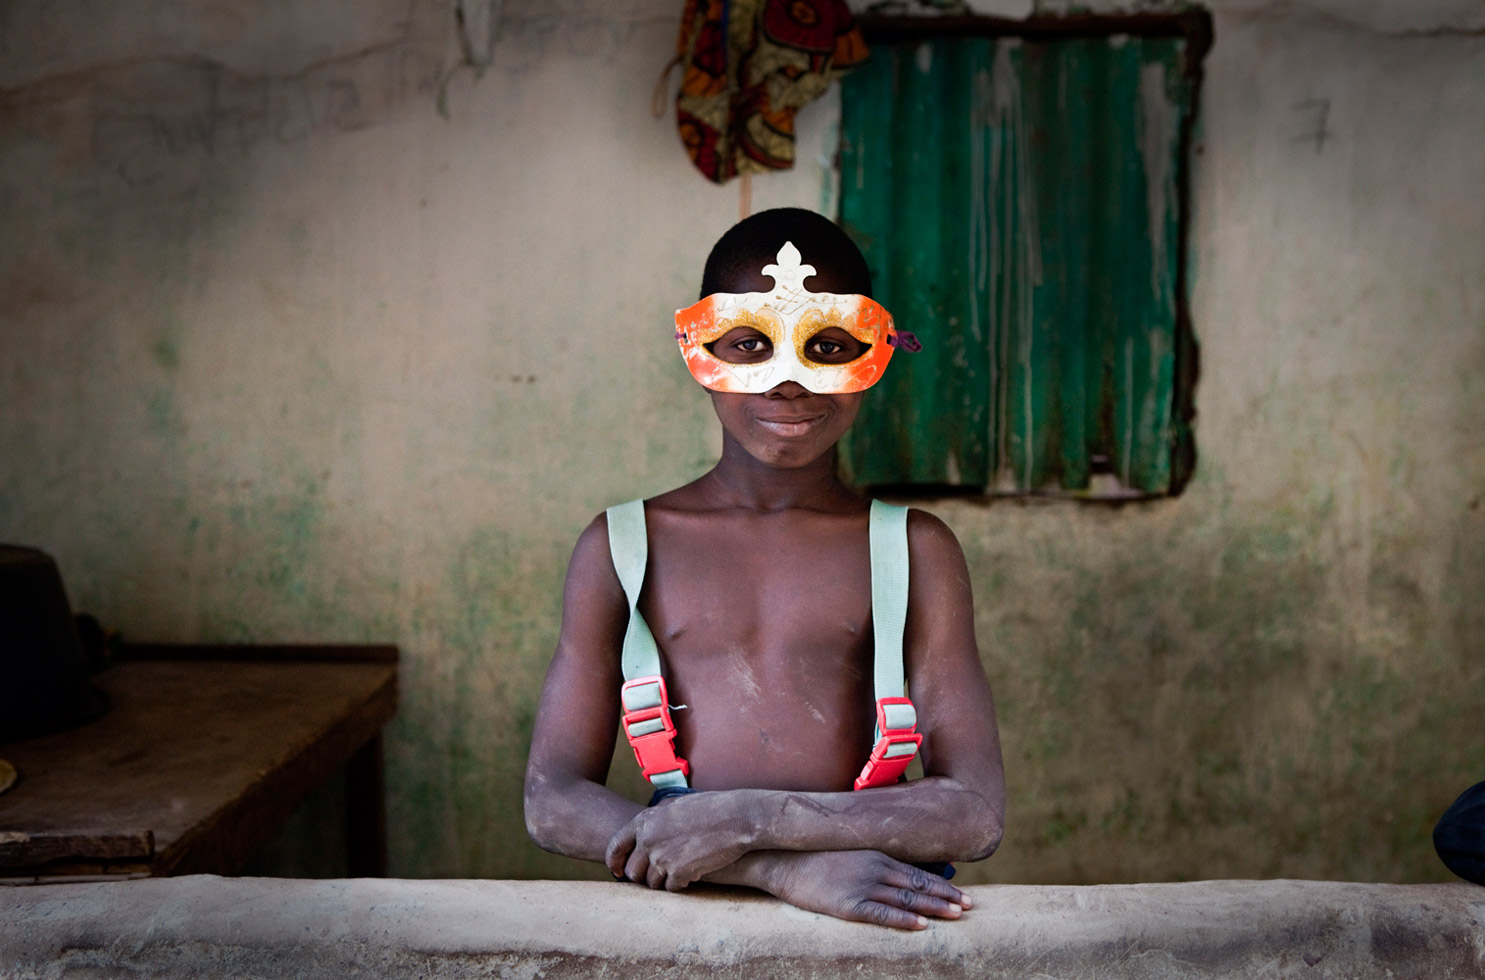 A young boy plays 'dress-up' with a Mardi Gras-style masque in the village of Mandinari, a populous settlement on a 'bolon' (tributary) off the River Gambia.